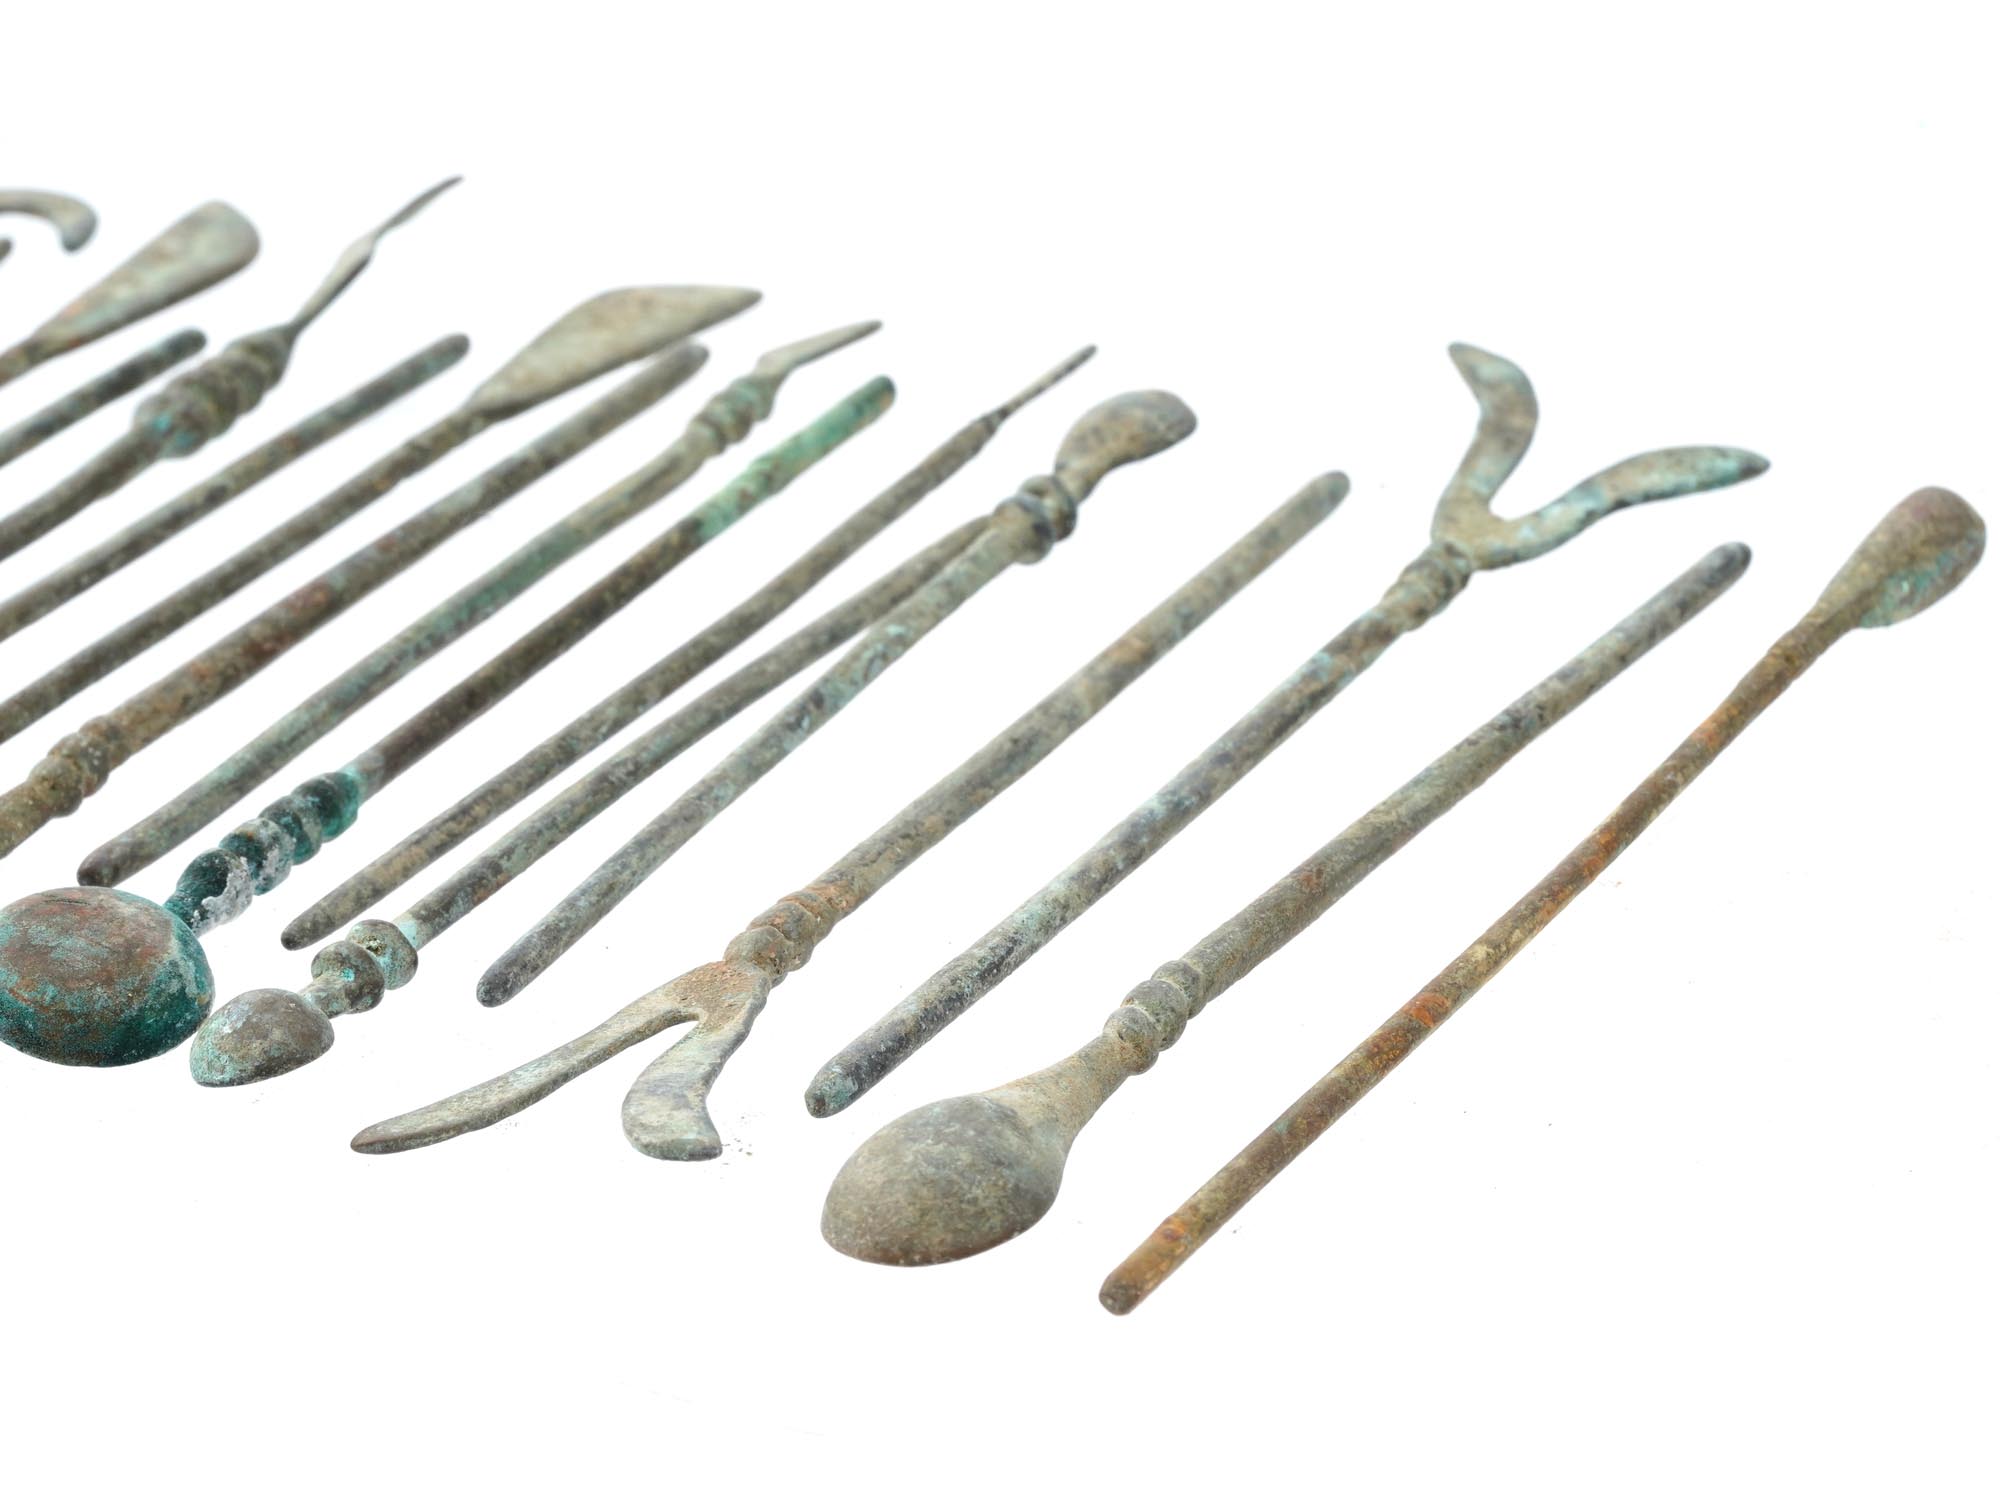 ANCIENT ROMAN MEDICAL TOOLS FOR SURGICAL PROCEDURES PIC-2